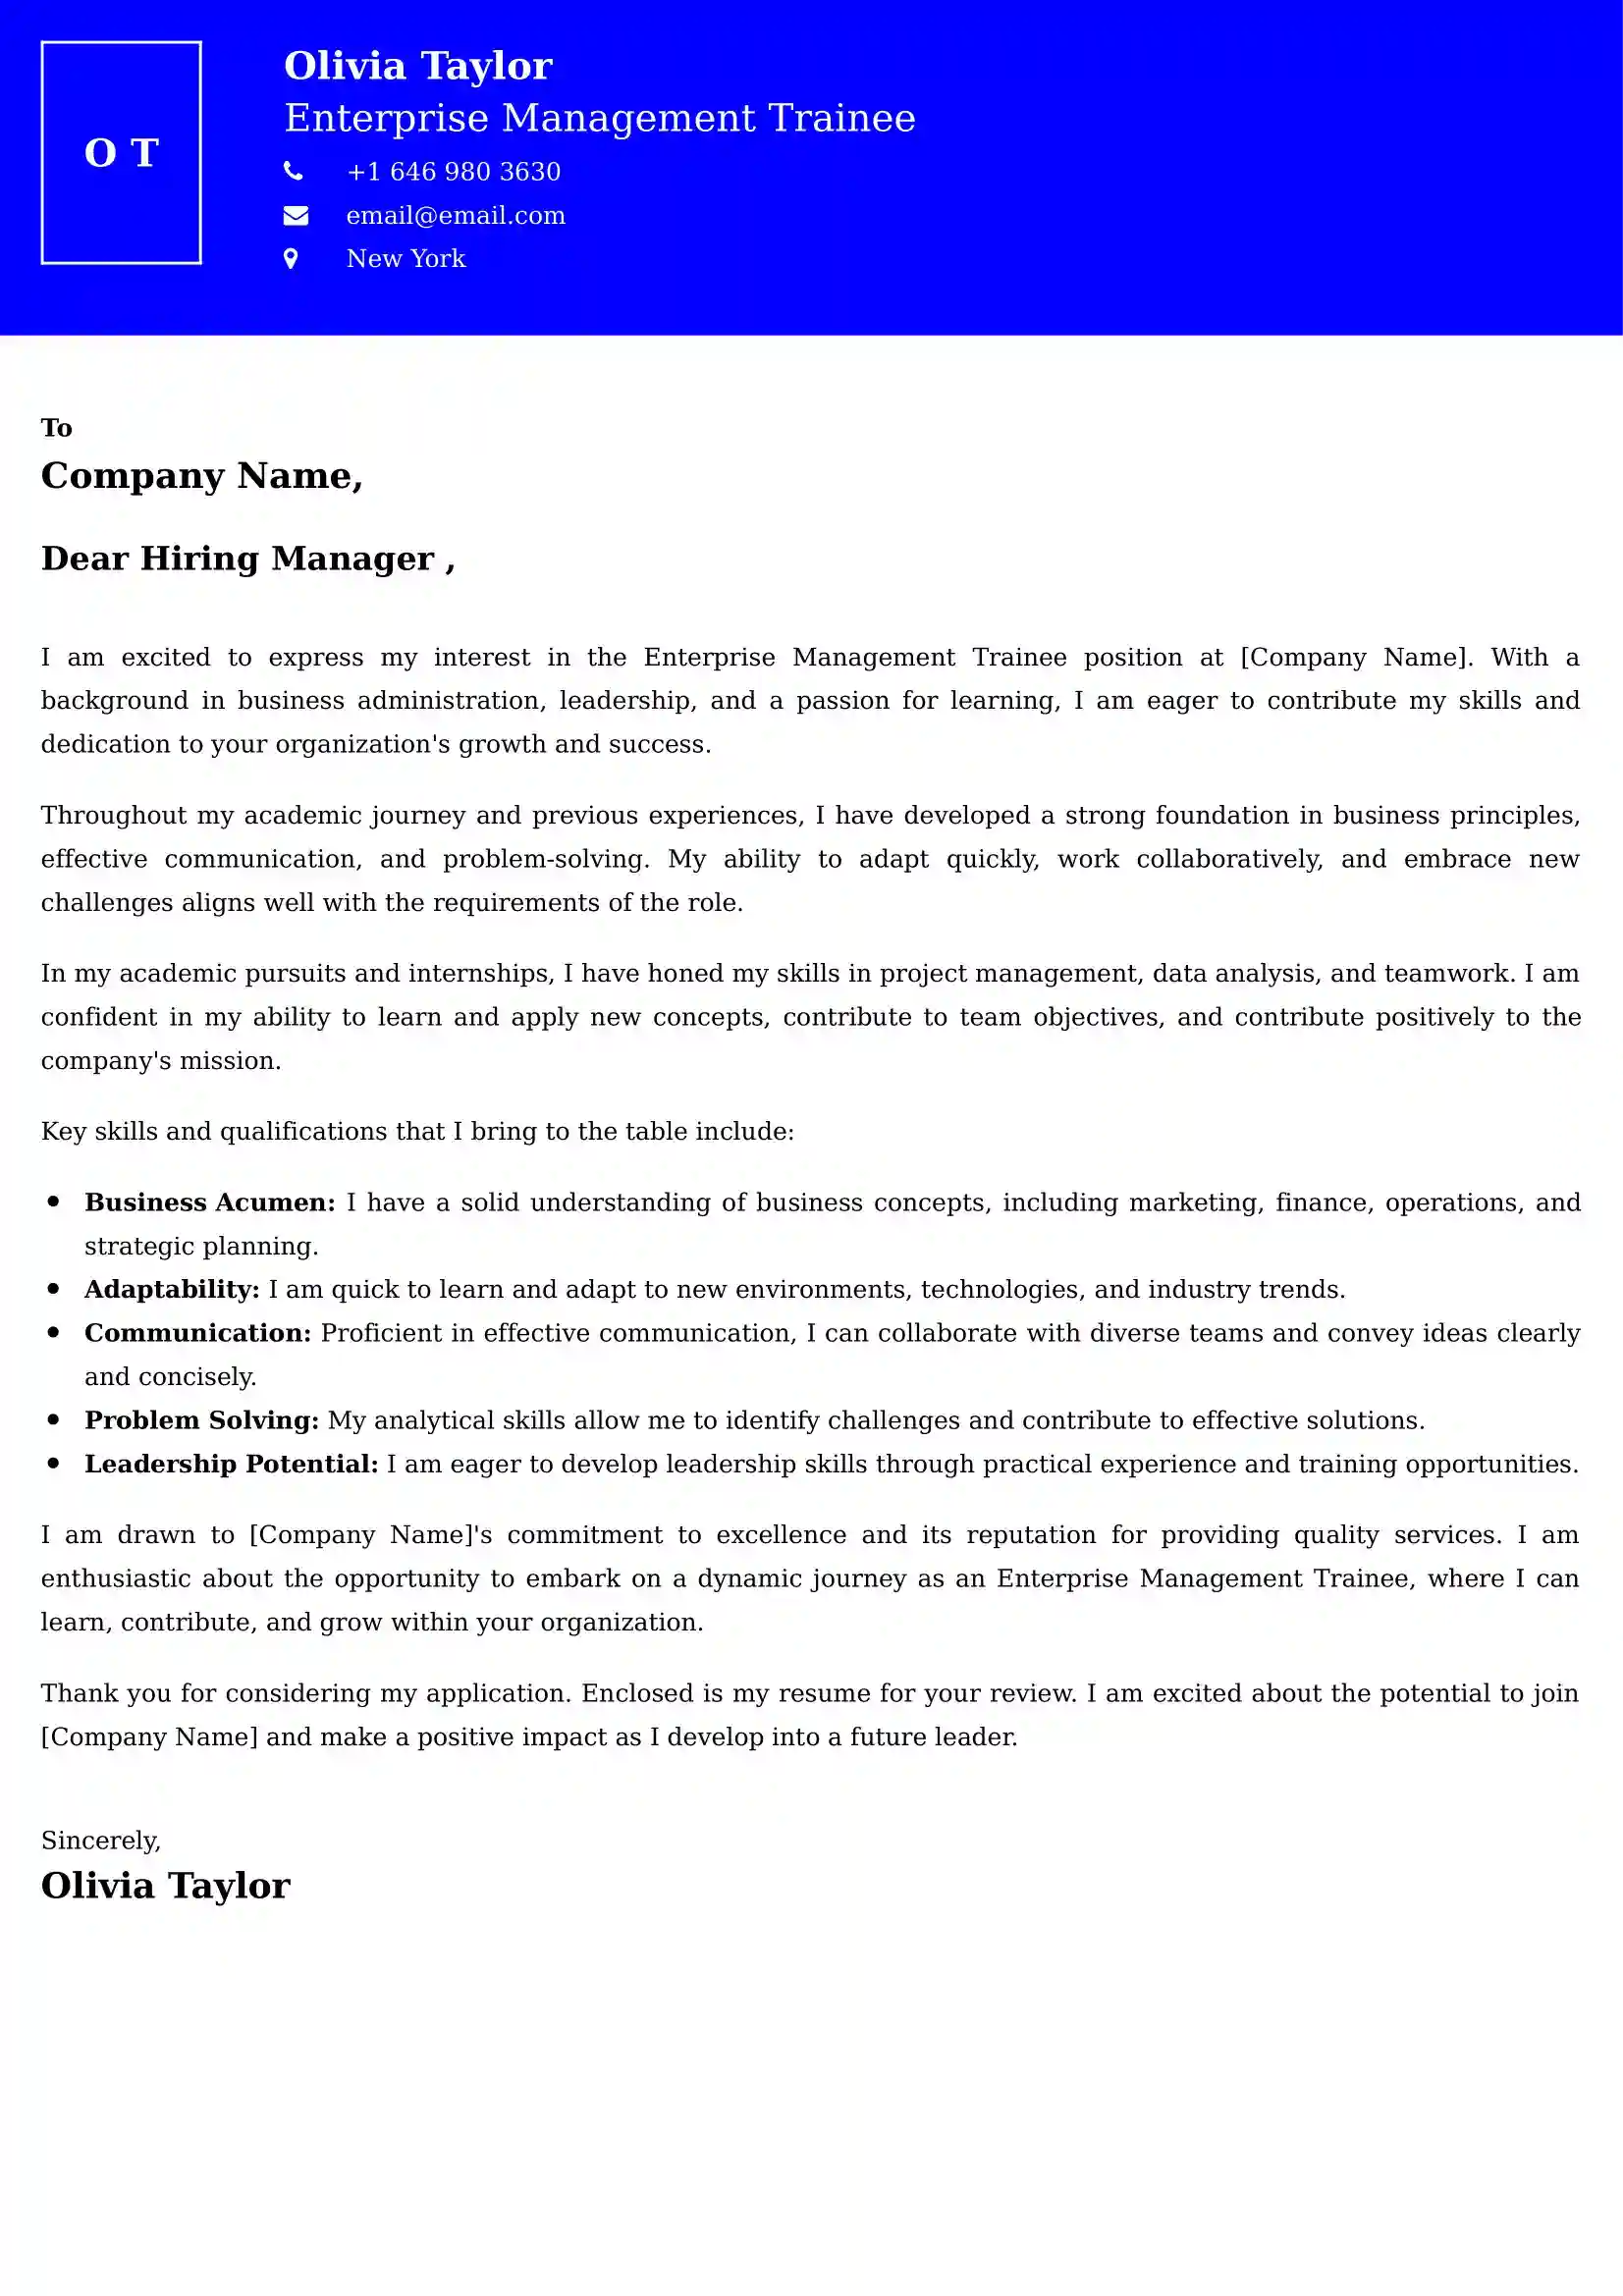 Enterprise Management Trainee Cover Letter Examples UK - Tips and Guide